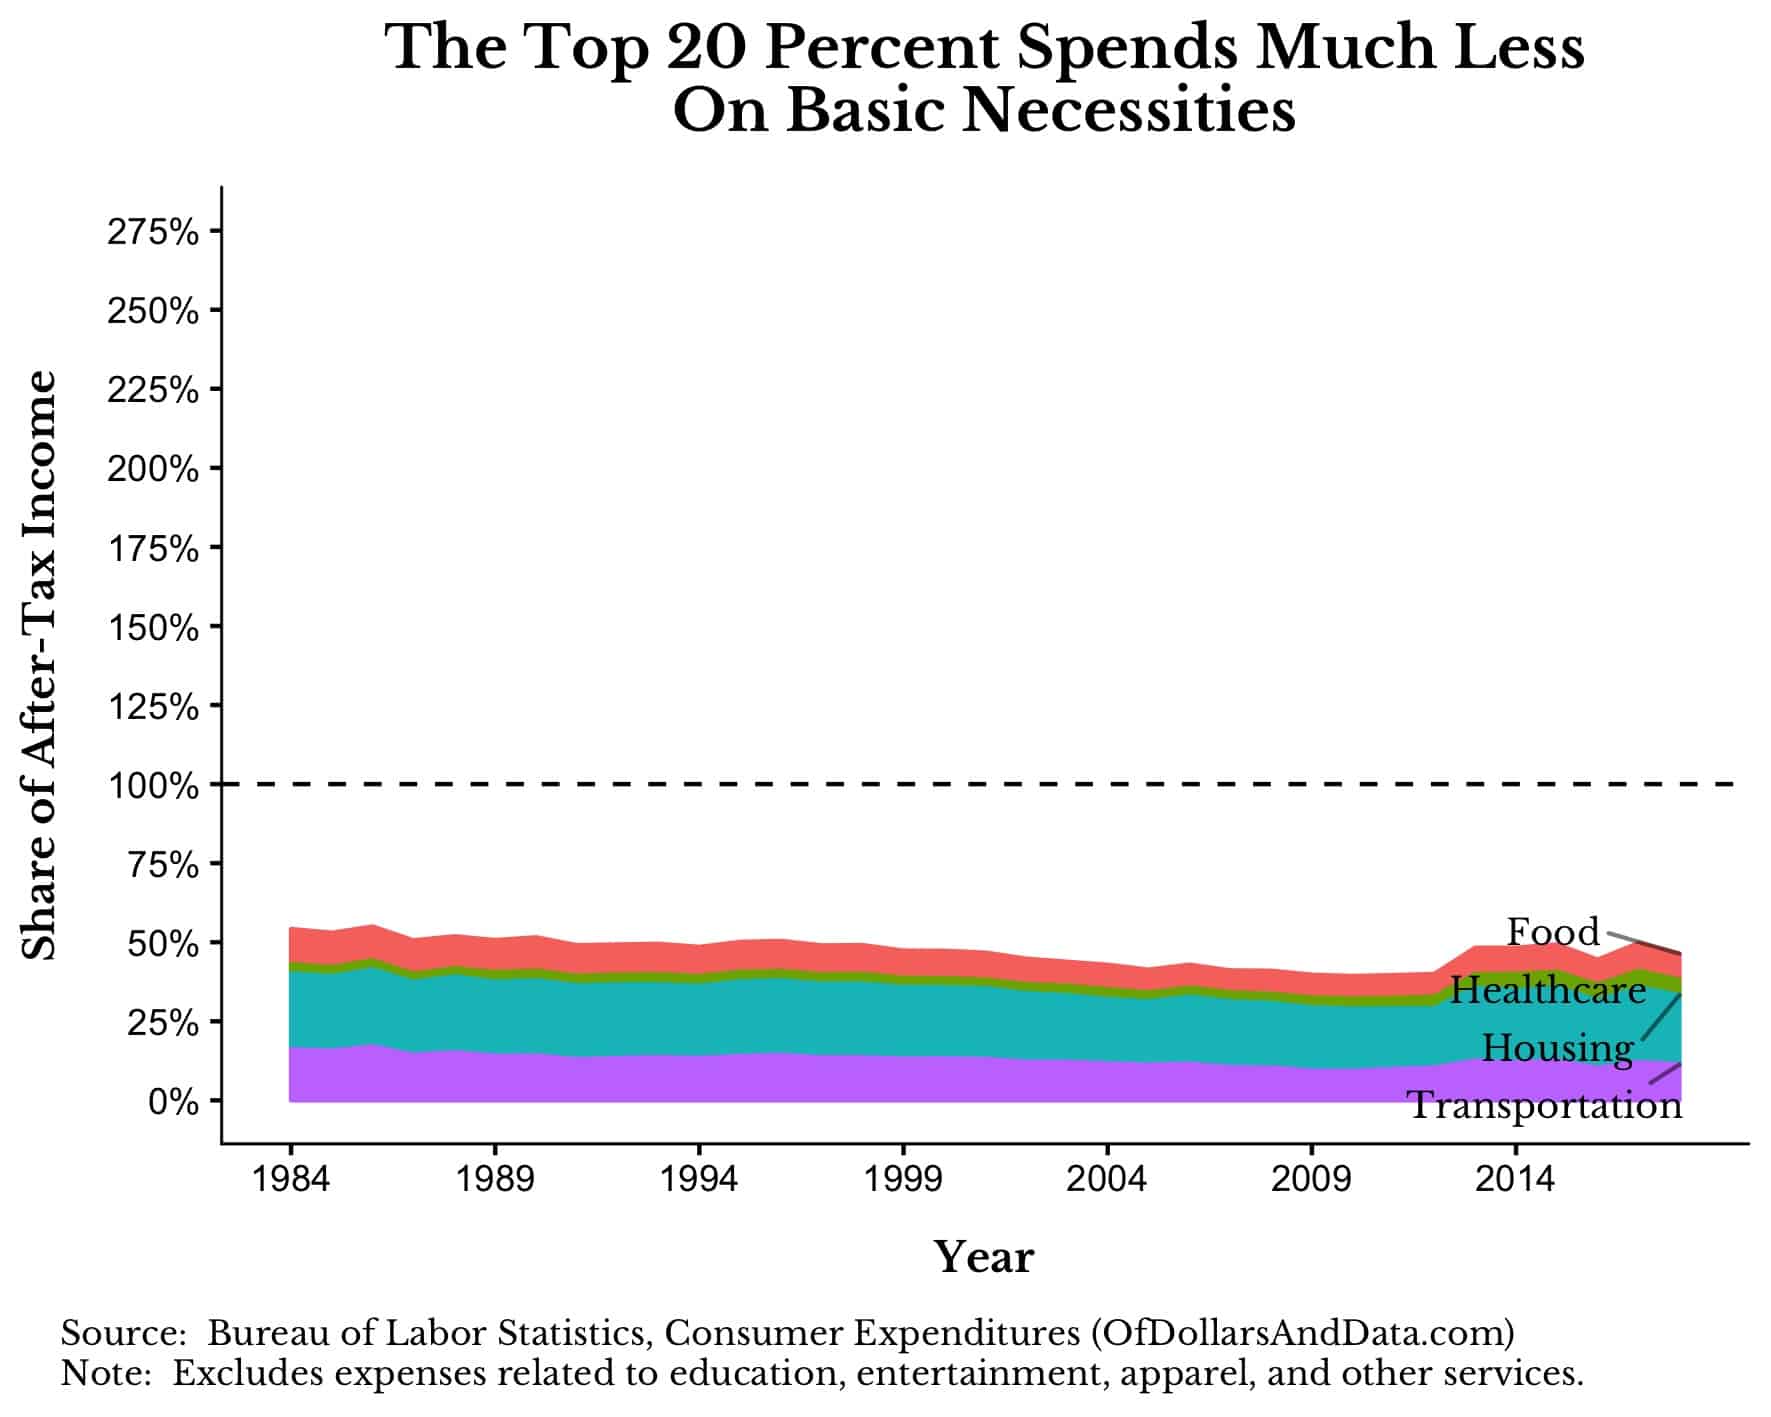 Basic necessity costs as a percentage of income for the top 20 percent of earners over time